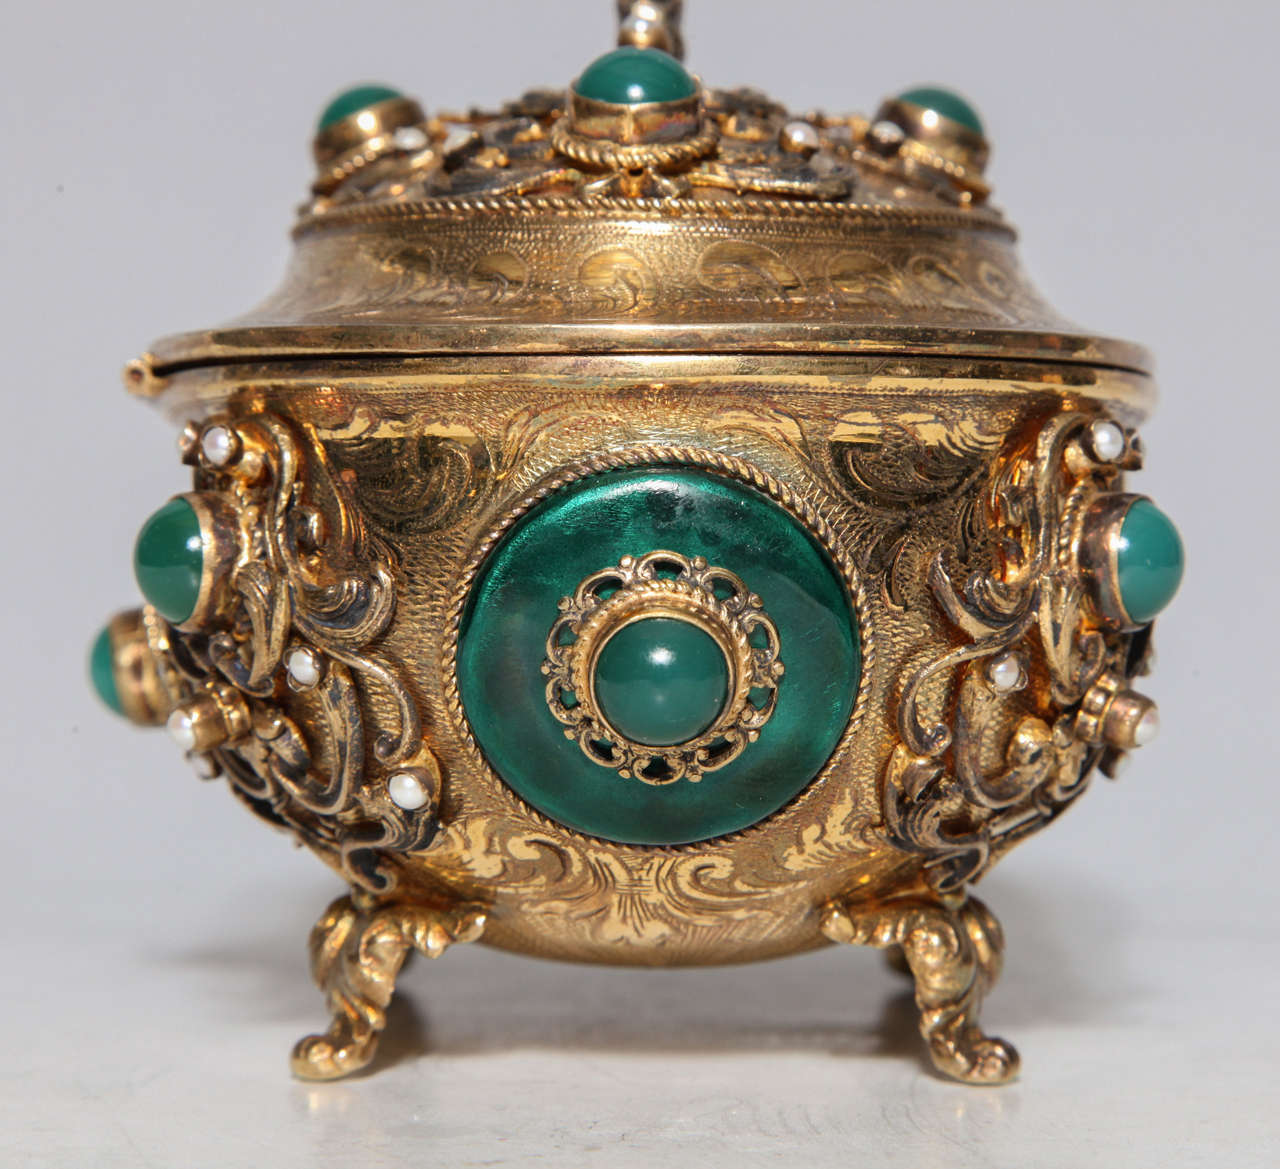 Austrian Viennese Judaica Silver Etrog Box, Jeweled with Pearls and Possibly Jade